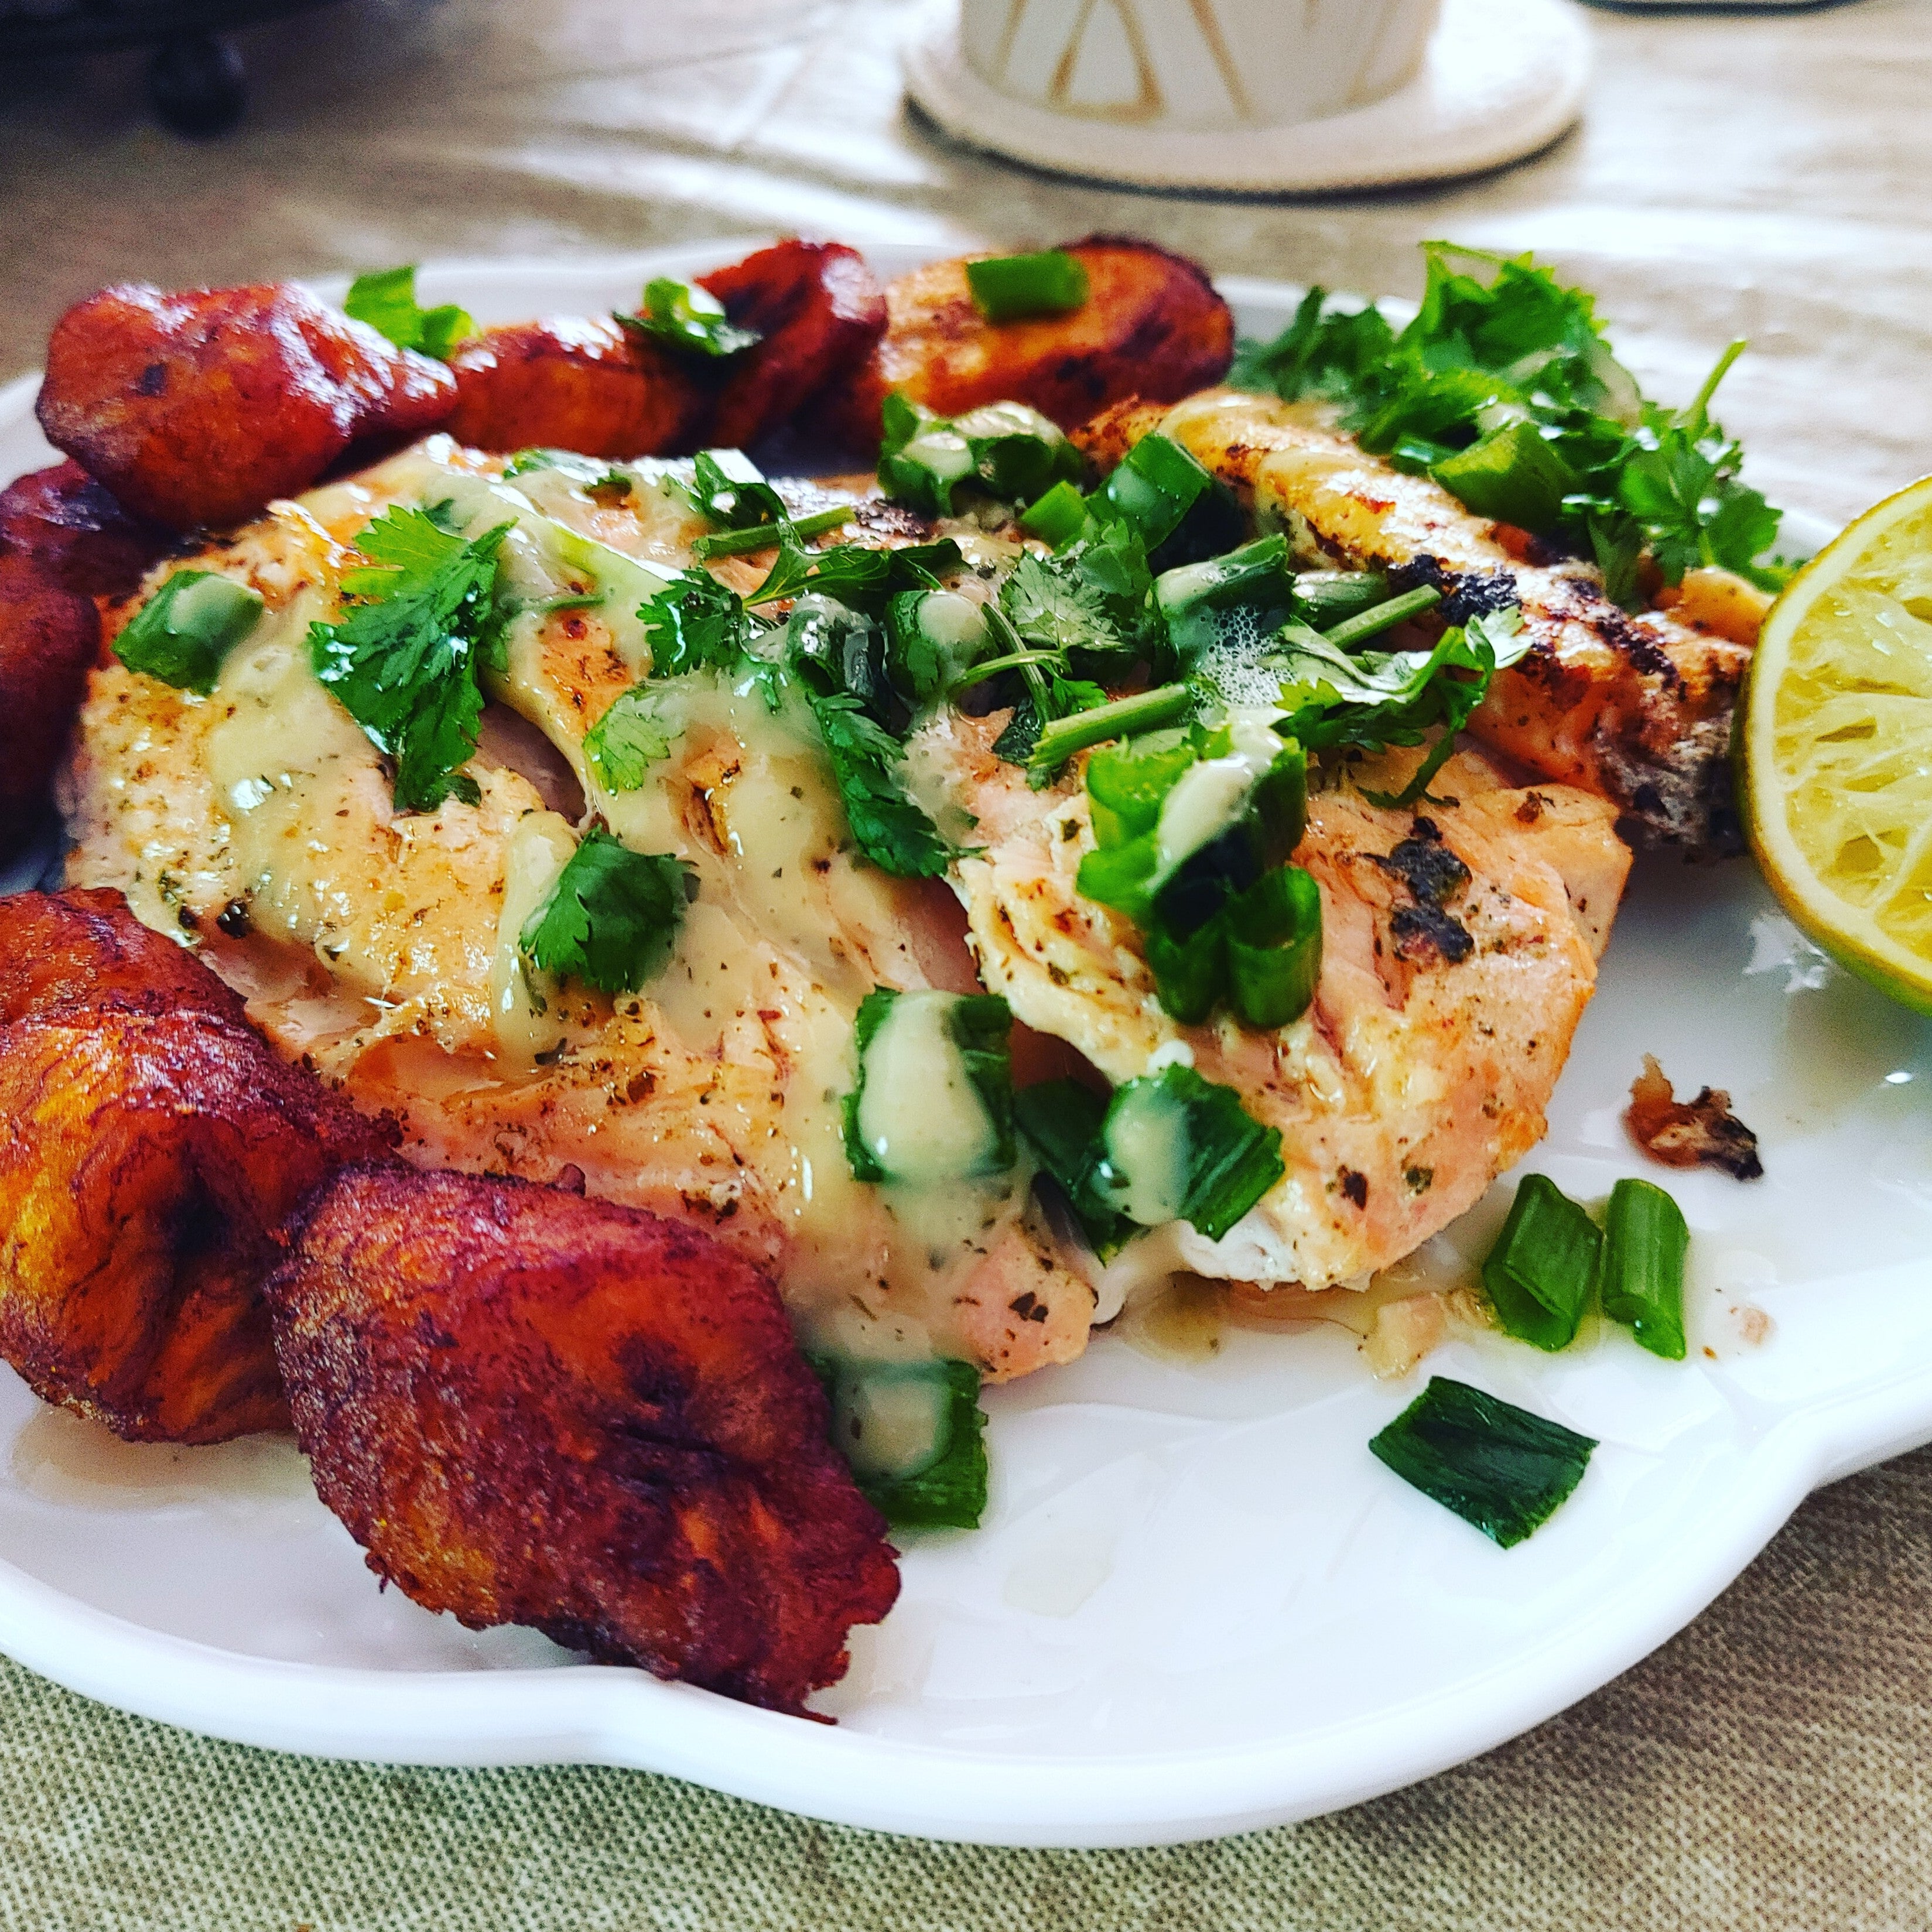 Succulent salmon sweet plantains drizzled with Cilantro Lime sauceains